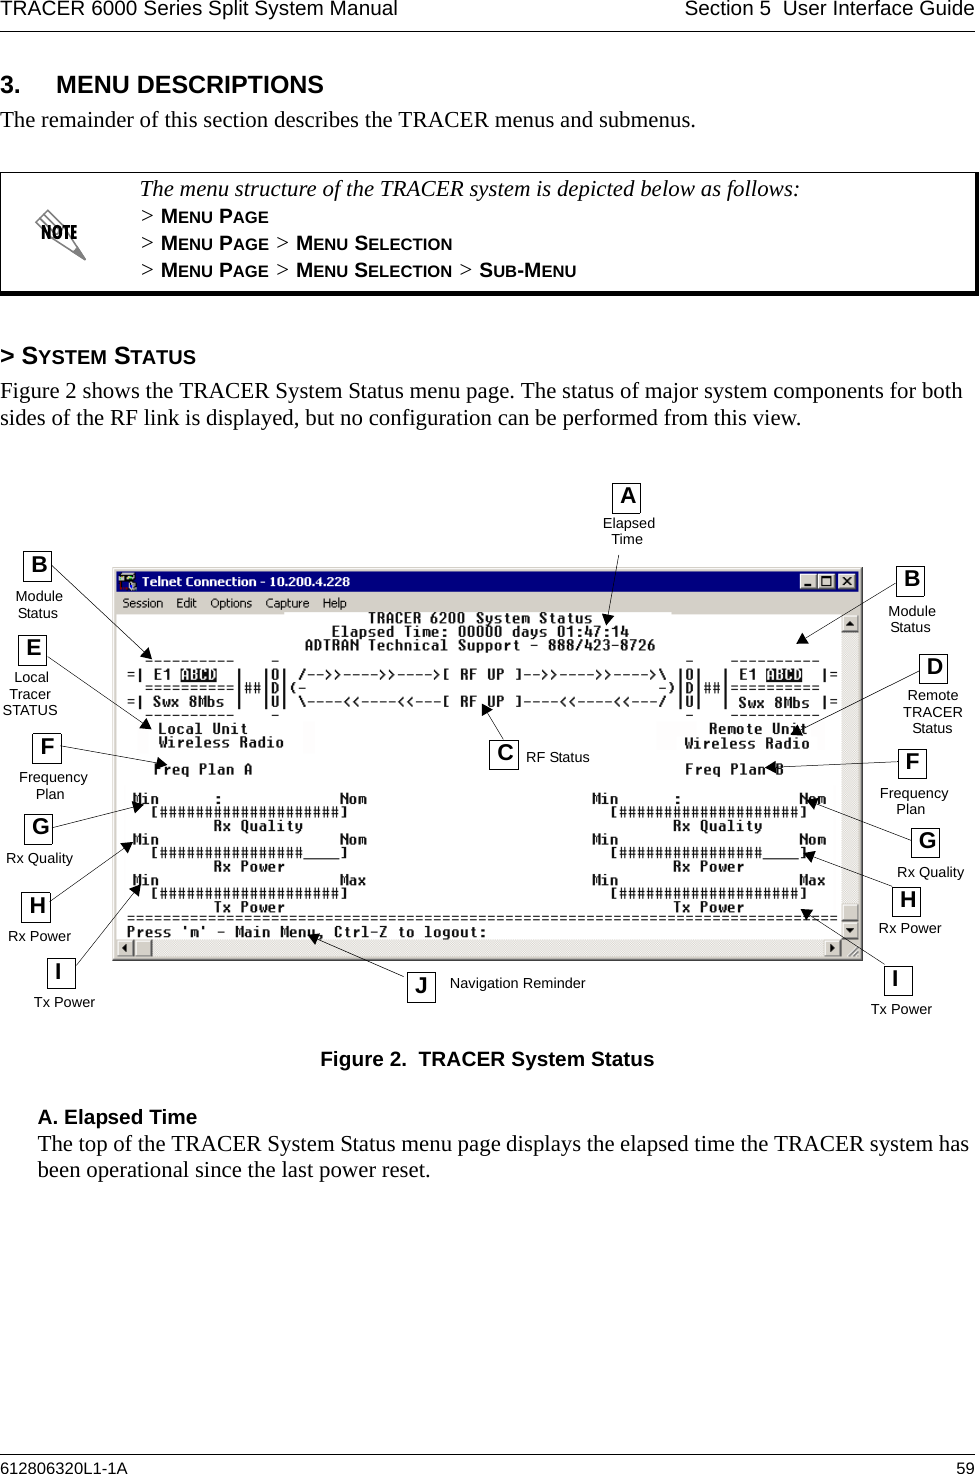 TRACER 6000 Series Split System Manual Section 5  User Interface Guide612806320L1-1A 593. MENU DESCRIPTIONSThe remainder of this section describes the TRACER menus and submenus. &gt; SYSTEM STATUSFigure 2 shows the TRACER System Status menu page. The status of major system components for both sides of the RF link is displayed, but no configuration can be performed from this view.Figure 2.  TRACER System StatusA. Elapsed TimeThe top of the TRACER System Status menu page displays the elapsed time the TRACER system has been operational since the last power reset.The menu structure of the TRACER system is depicted below as follows: &gt; MENU PAGE &gt; MENU PAGE &gt; MENU SELECTION &gt; MENU PAGE &gt; MENU SELECTION &gt; SUB-MENUAElapsedTimeELocalFFrequencyHRx PowerCRF StatusModuleDRemoteFHRx PowerITx PowerITx Power JNavigation ReminderTracerSTATUSPlan FrequencyPlanTRACERStatusRx QualityGRx QualityBGStatusModuleBStatus